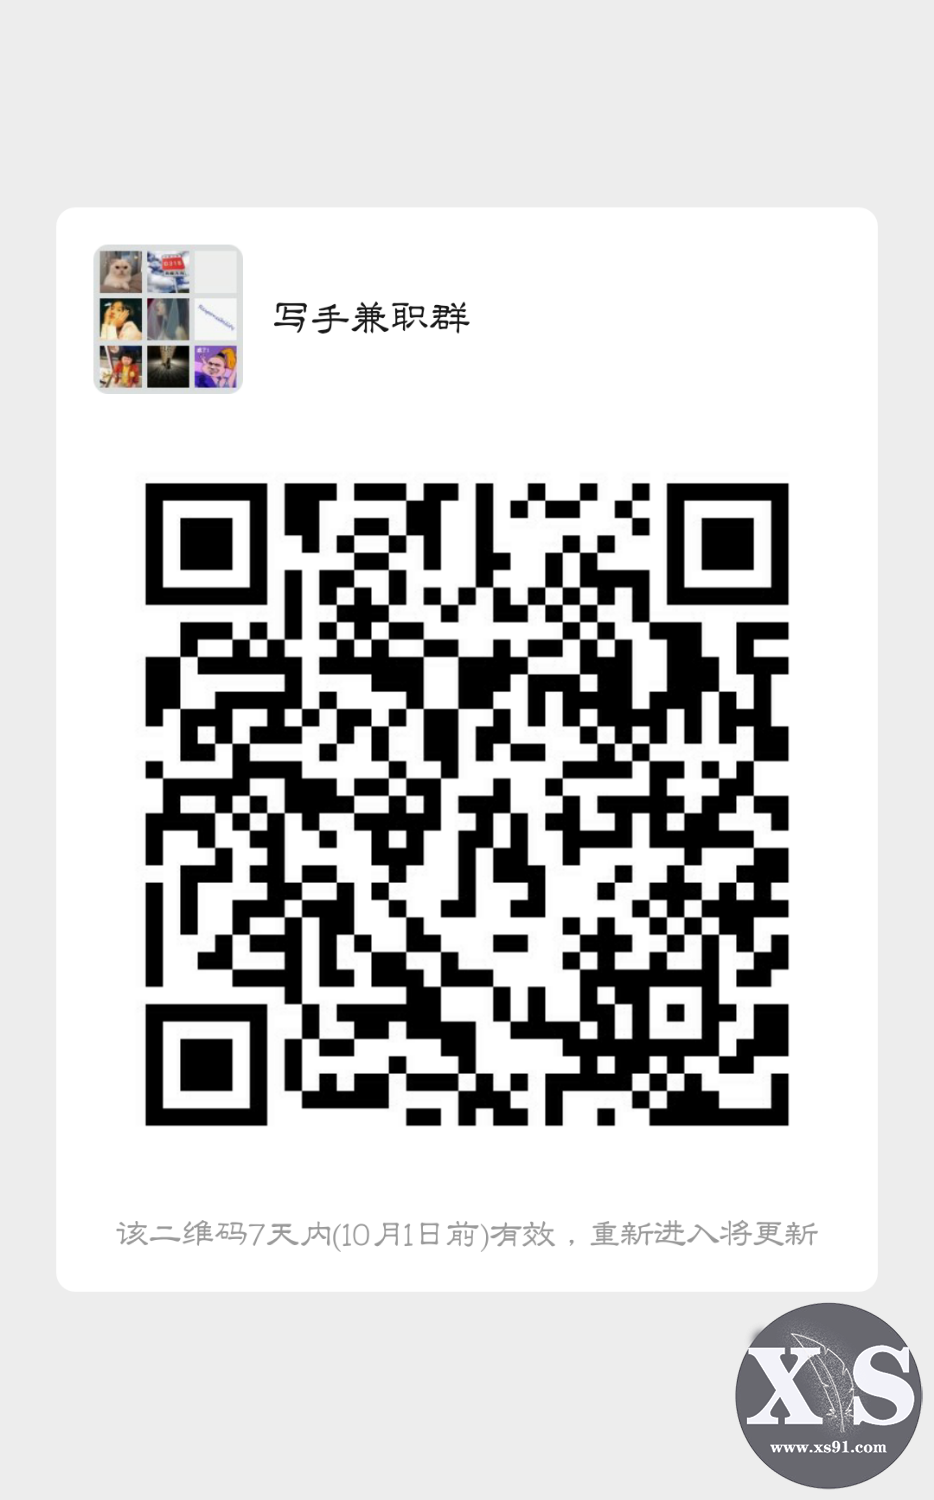 mmqrcode1569259684544.png